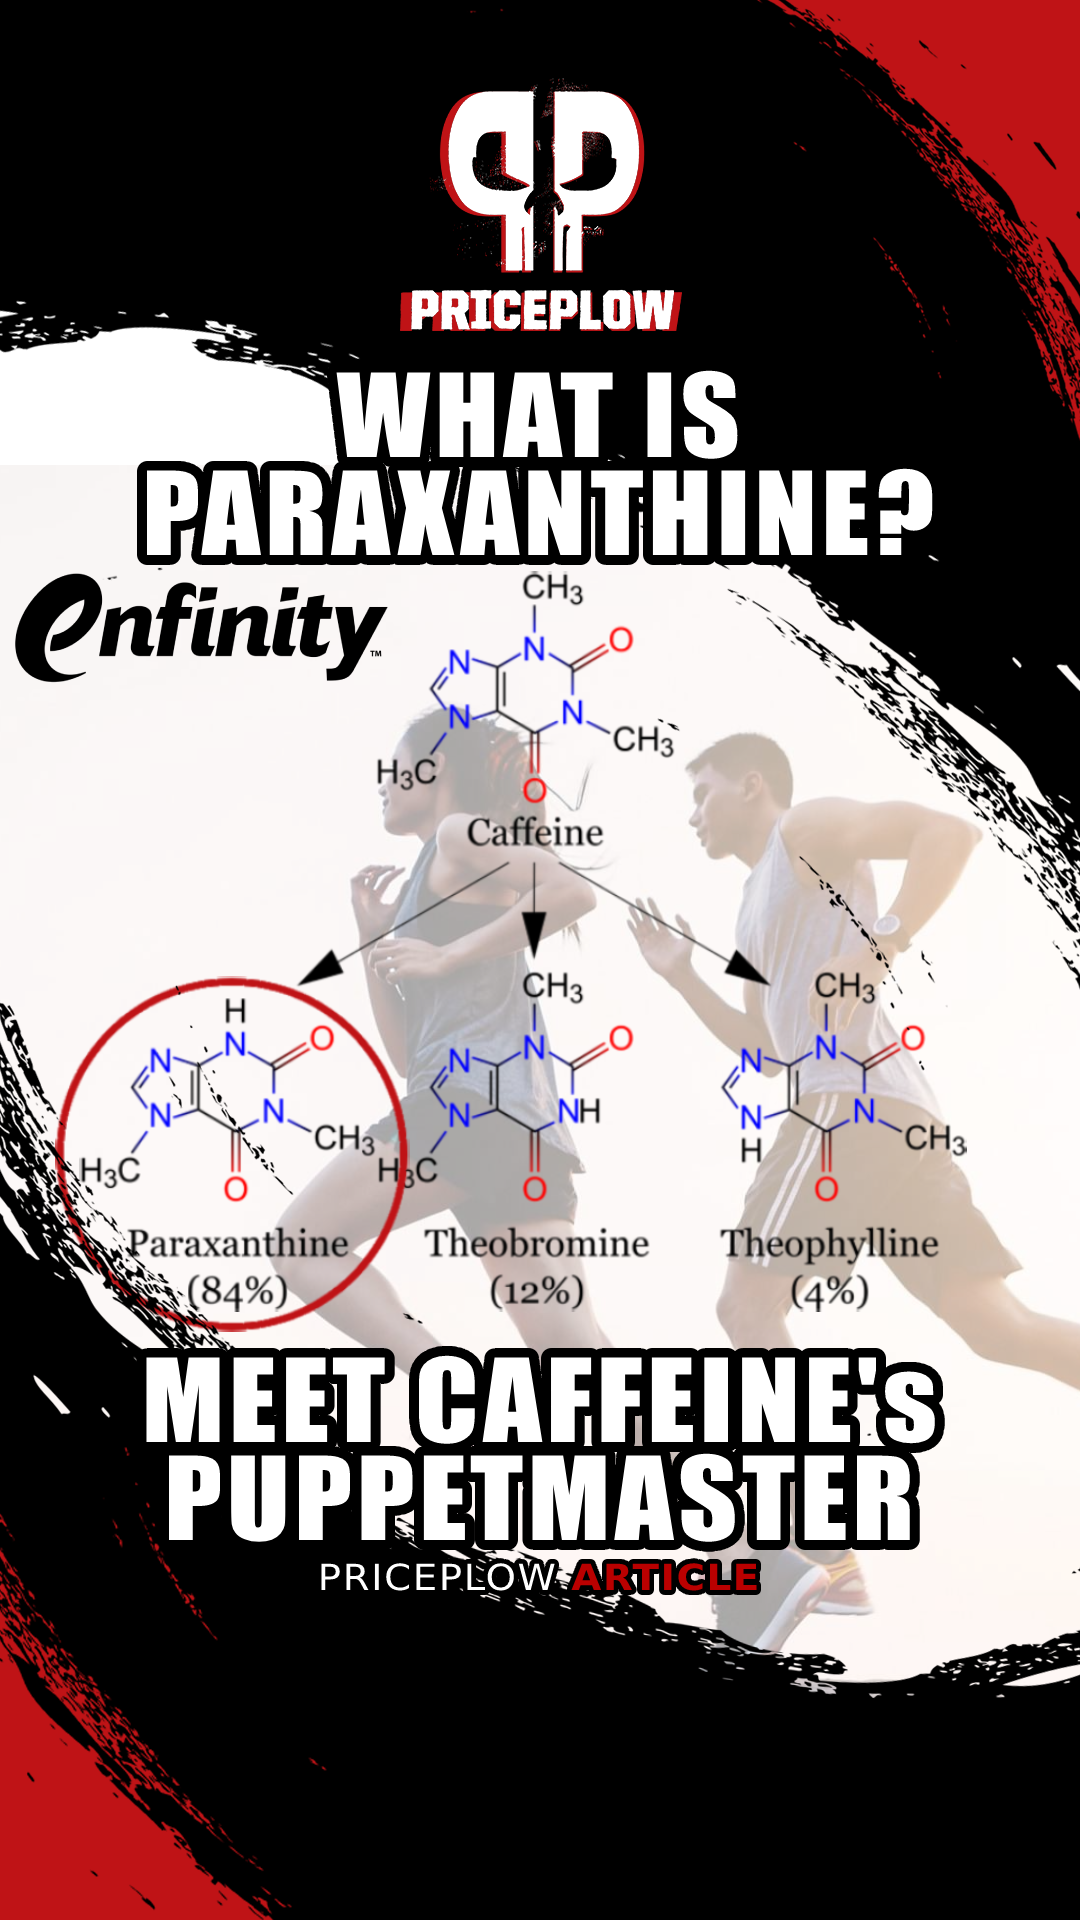 Paraxanthine: Sold as enfinity and Distributed by TSI Group